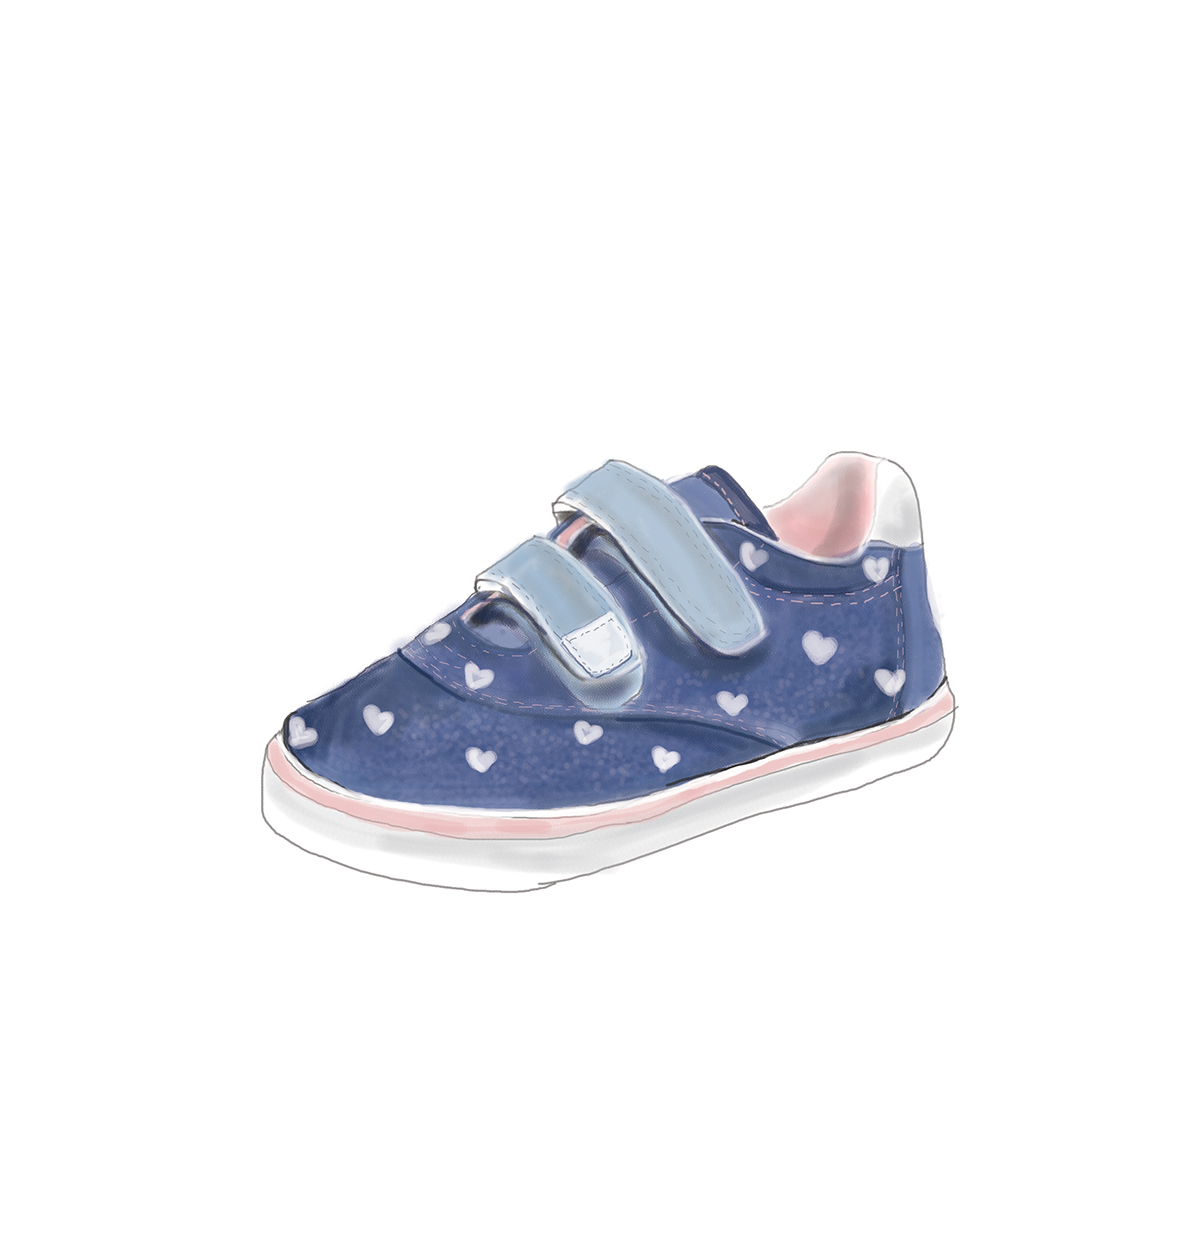 Illustrative fashion drawing pattern Style stylistic house drawing shoes shoe design pen